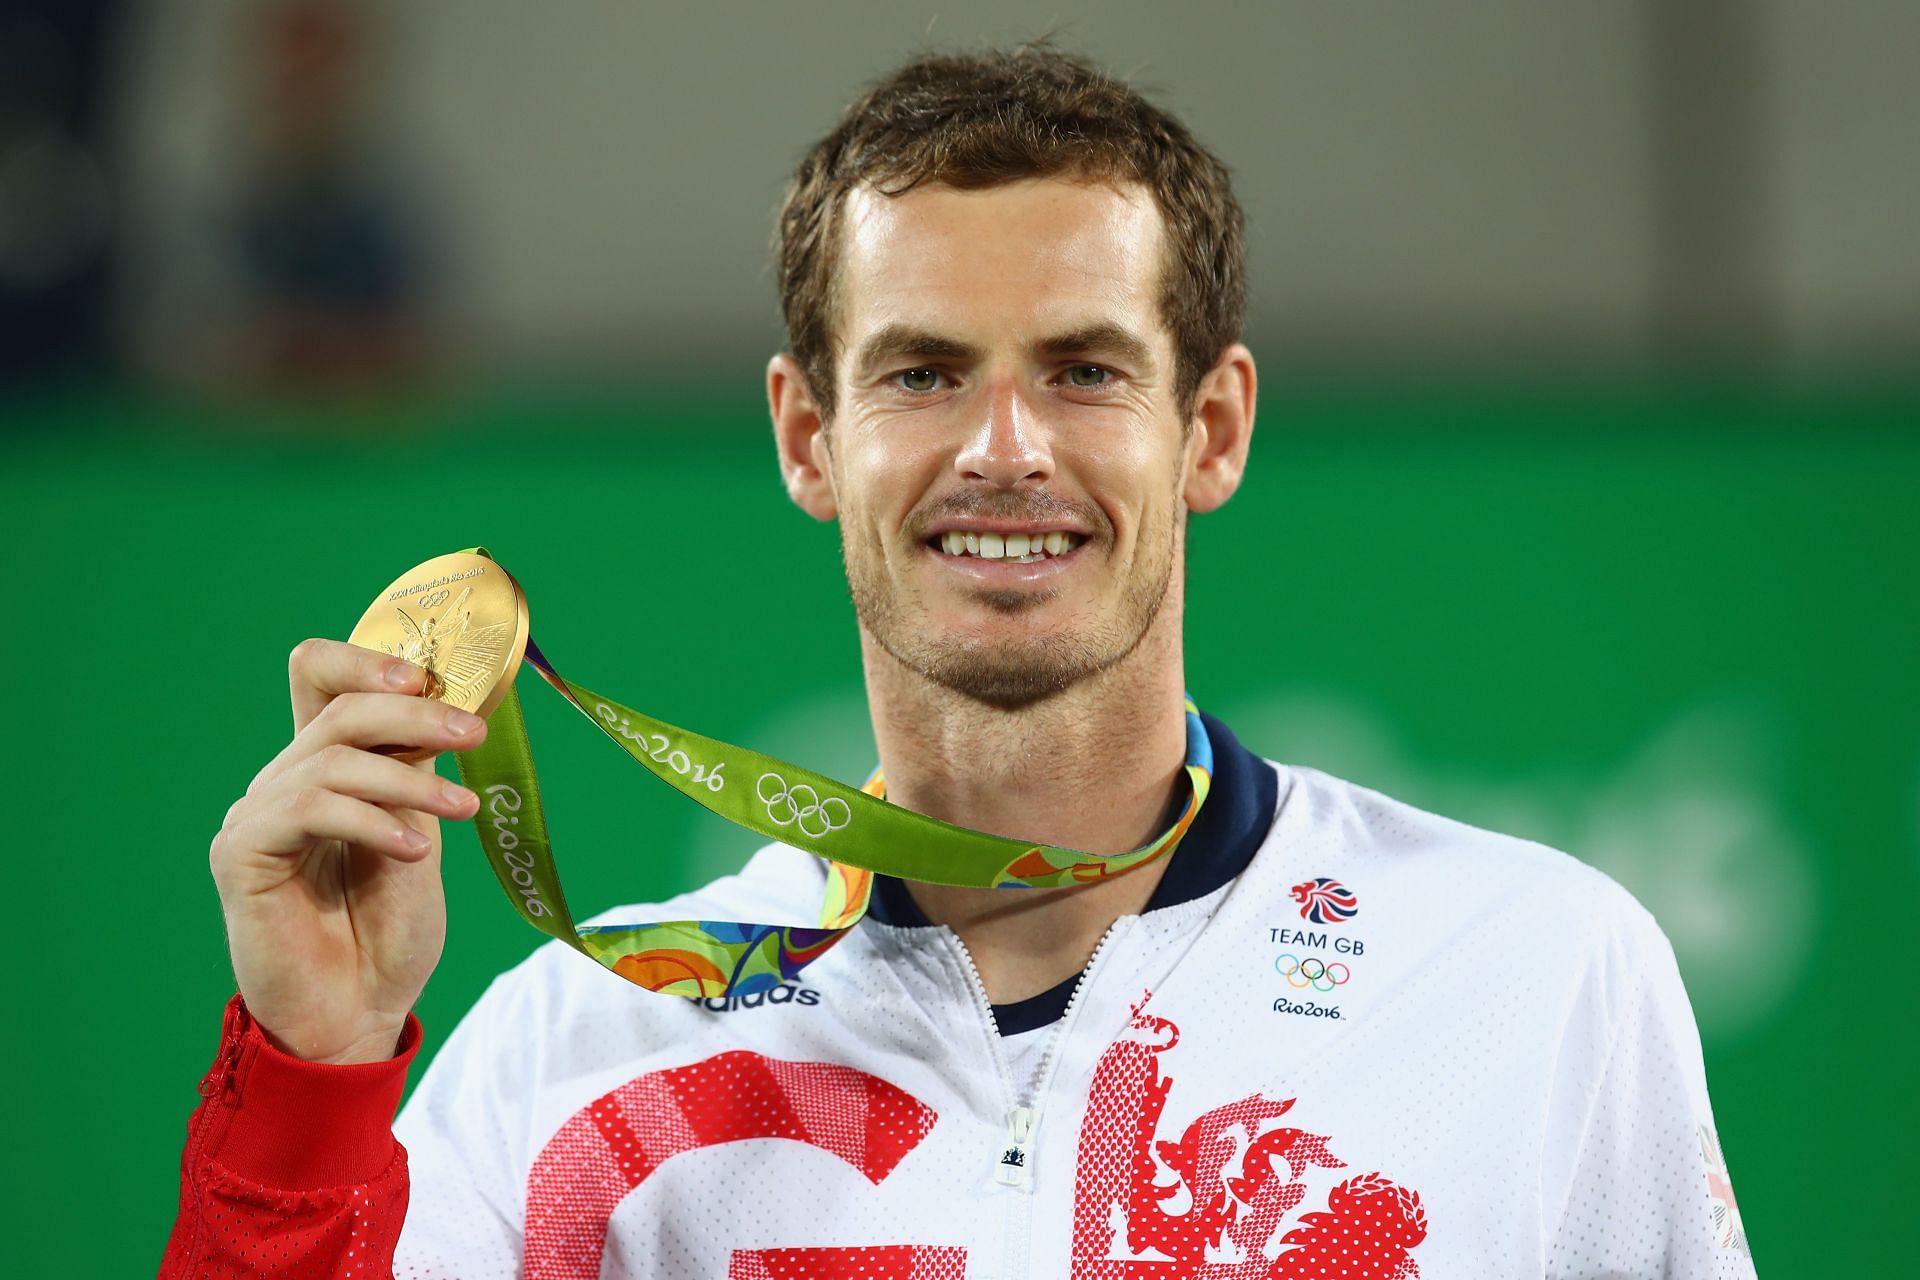 Andy Murray at the 2016 Olympics